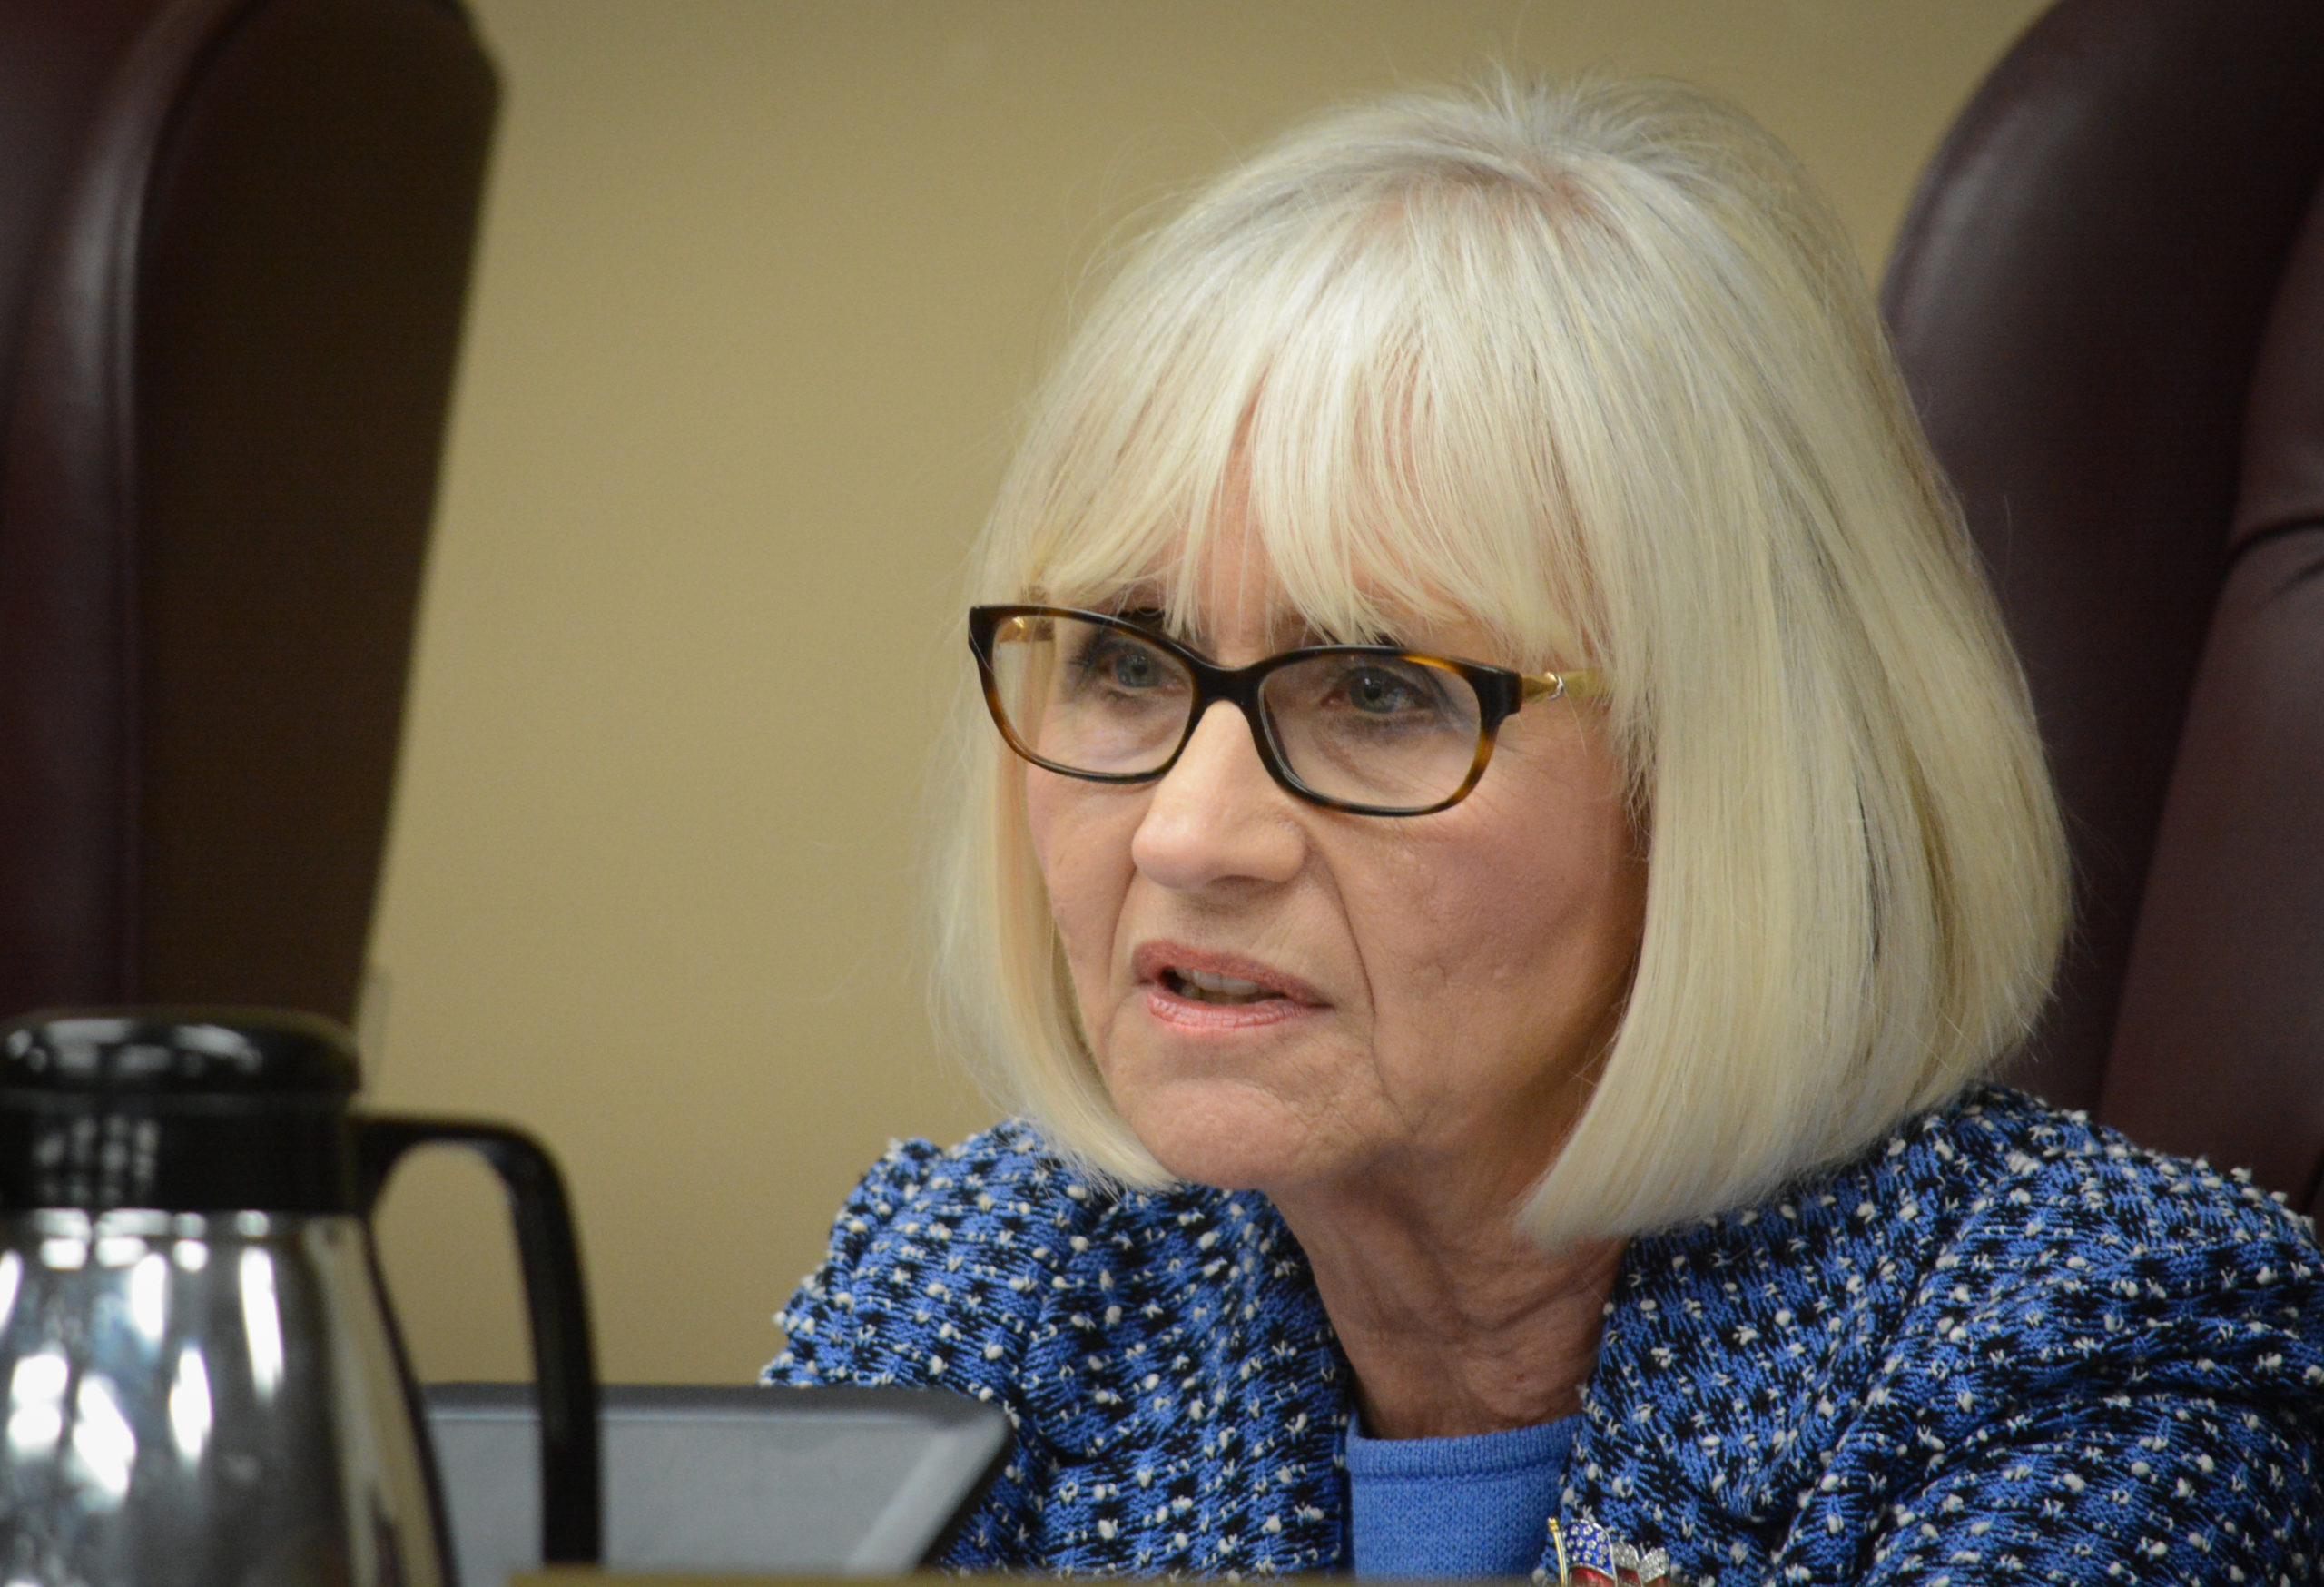 Town Supervisor Judi Bosworth and the town council voted unanimously to ban recreational marijuana sales in the town on Tuesday night. (Photo by Janelle Clausen)